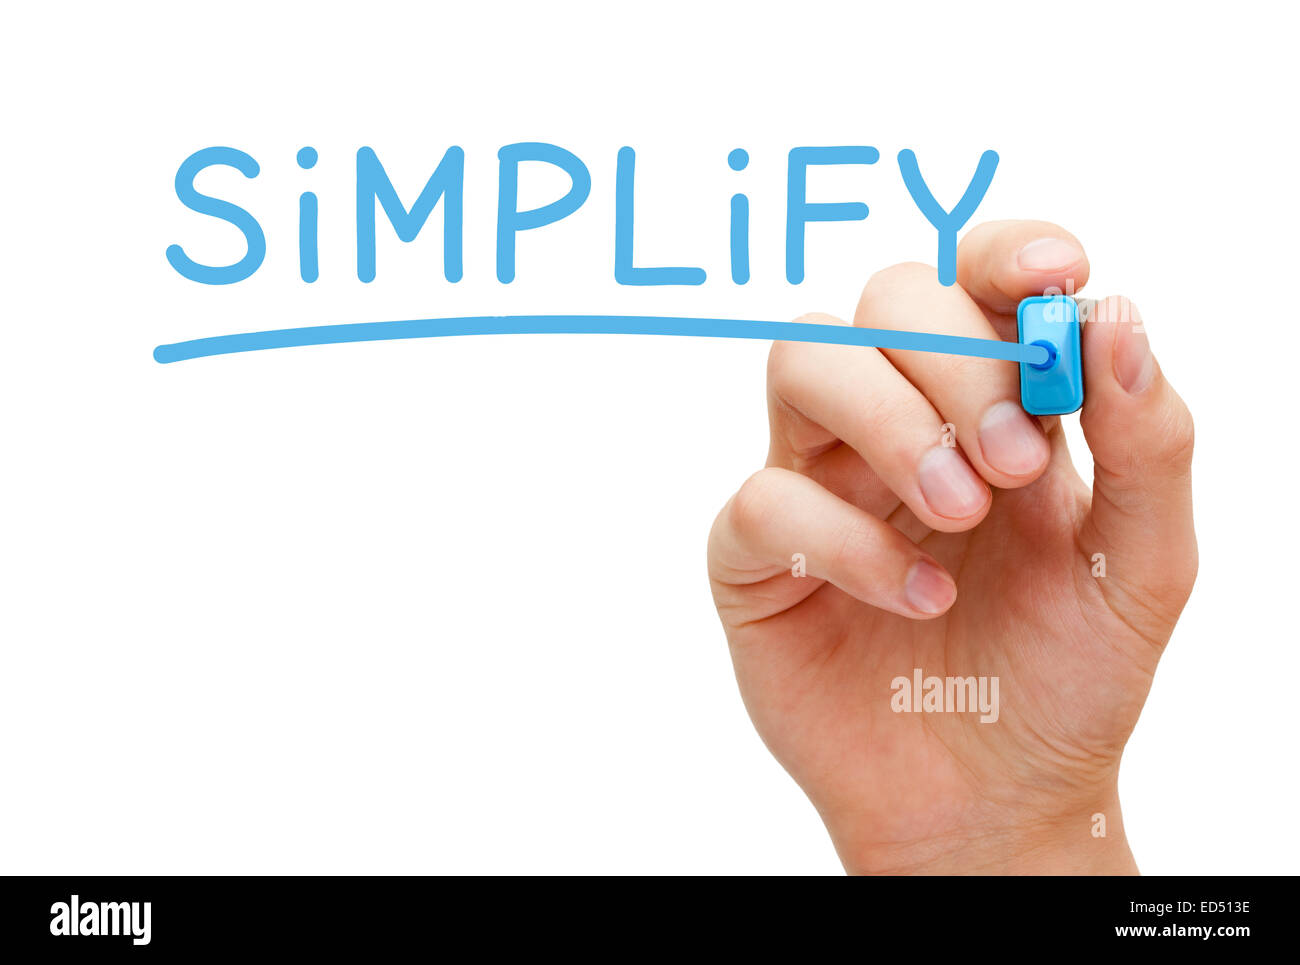 Hand writing Simplify with blue marker on transparent wipe board isolated on white. Stock Photo